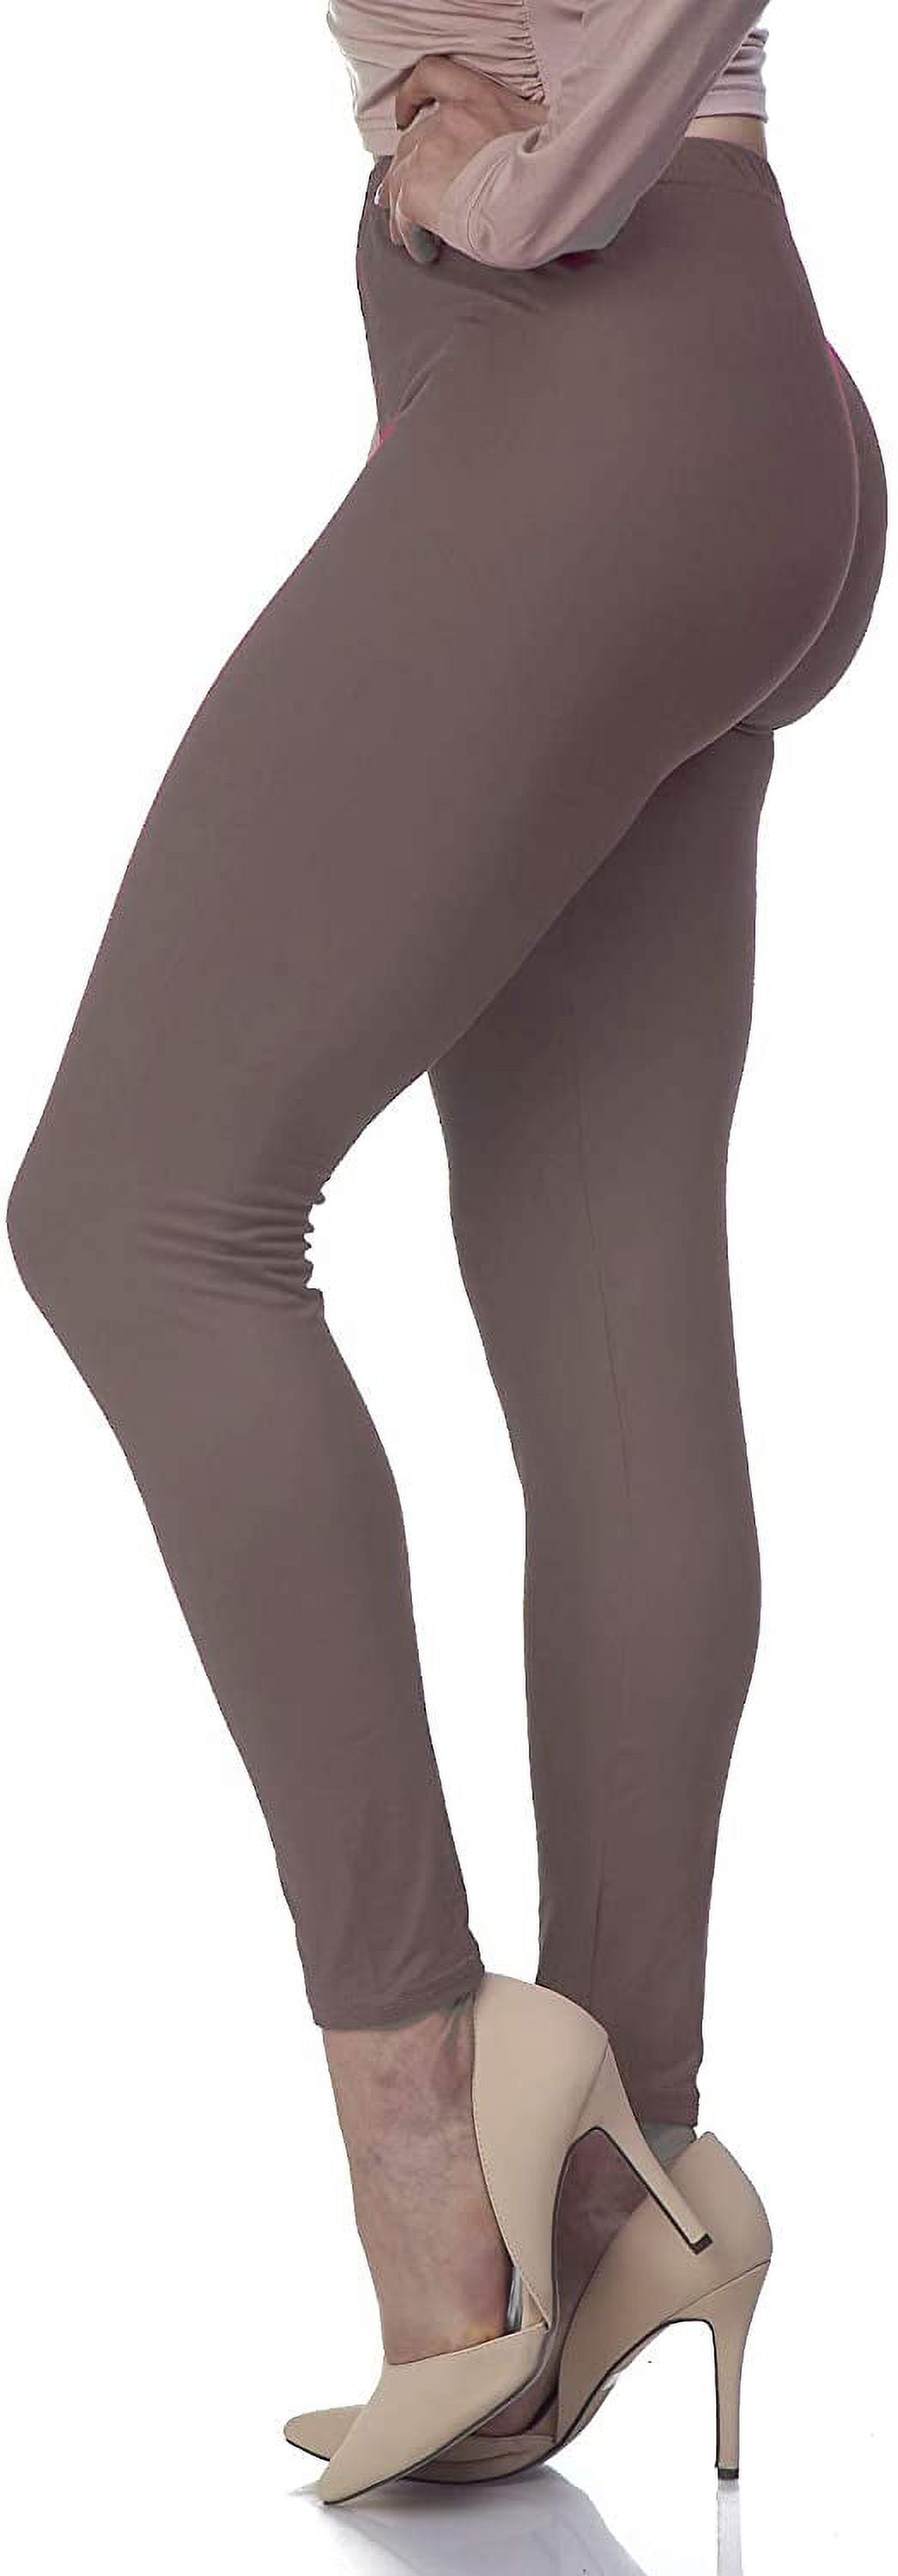 Lush Moda Black Buttery Soft Leggings - Variety of Colors - Black, One Size